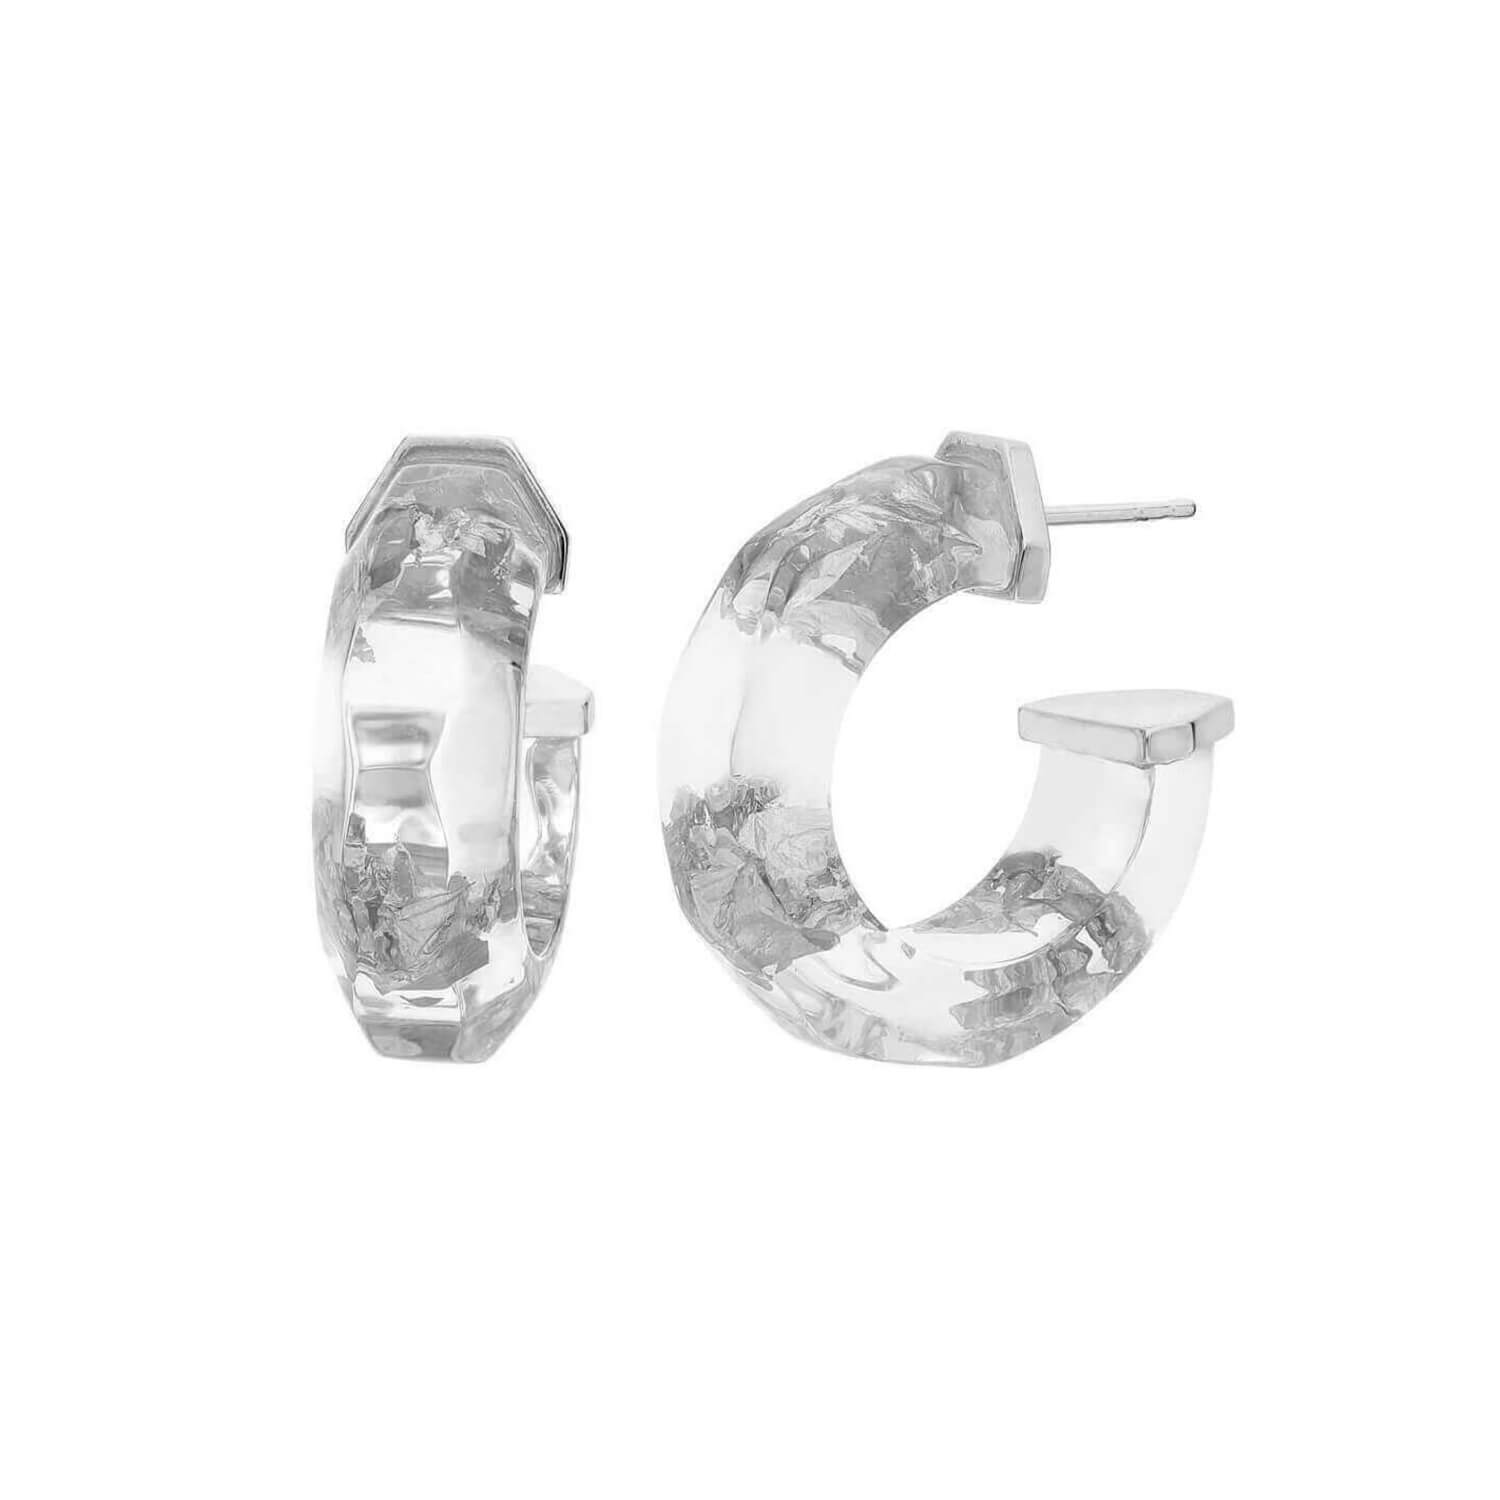 CLEAR SILVER LEAF LUCITE FACETED HOOPS